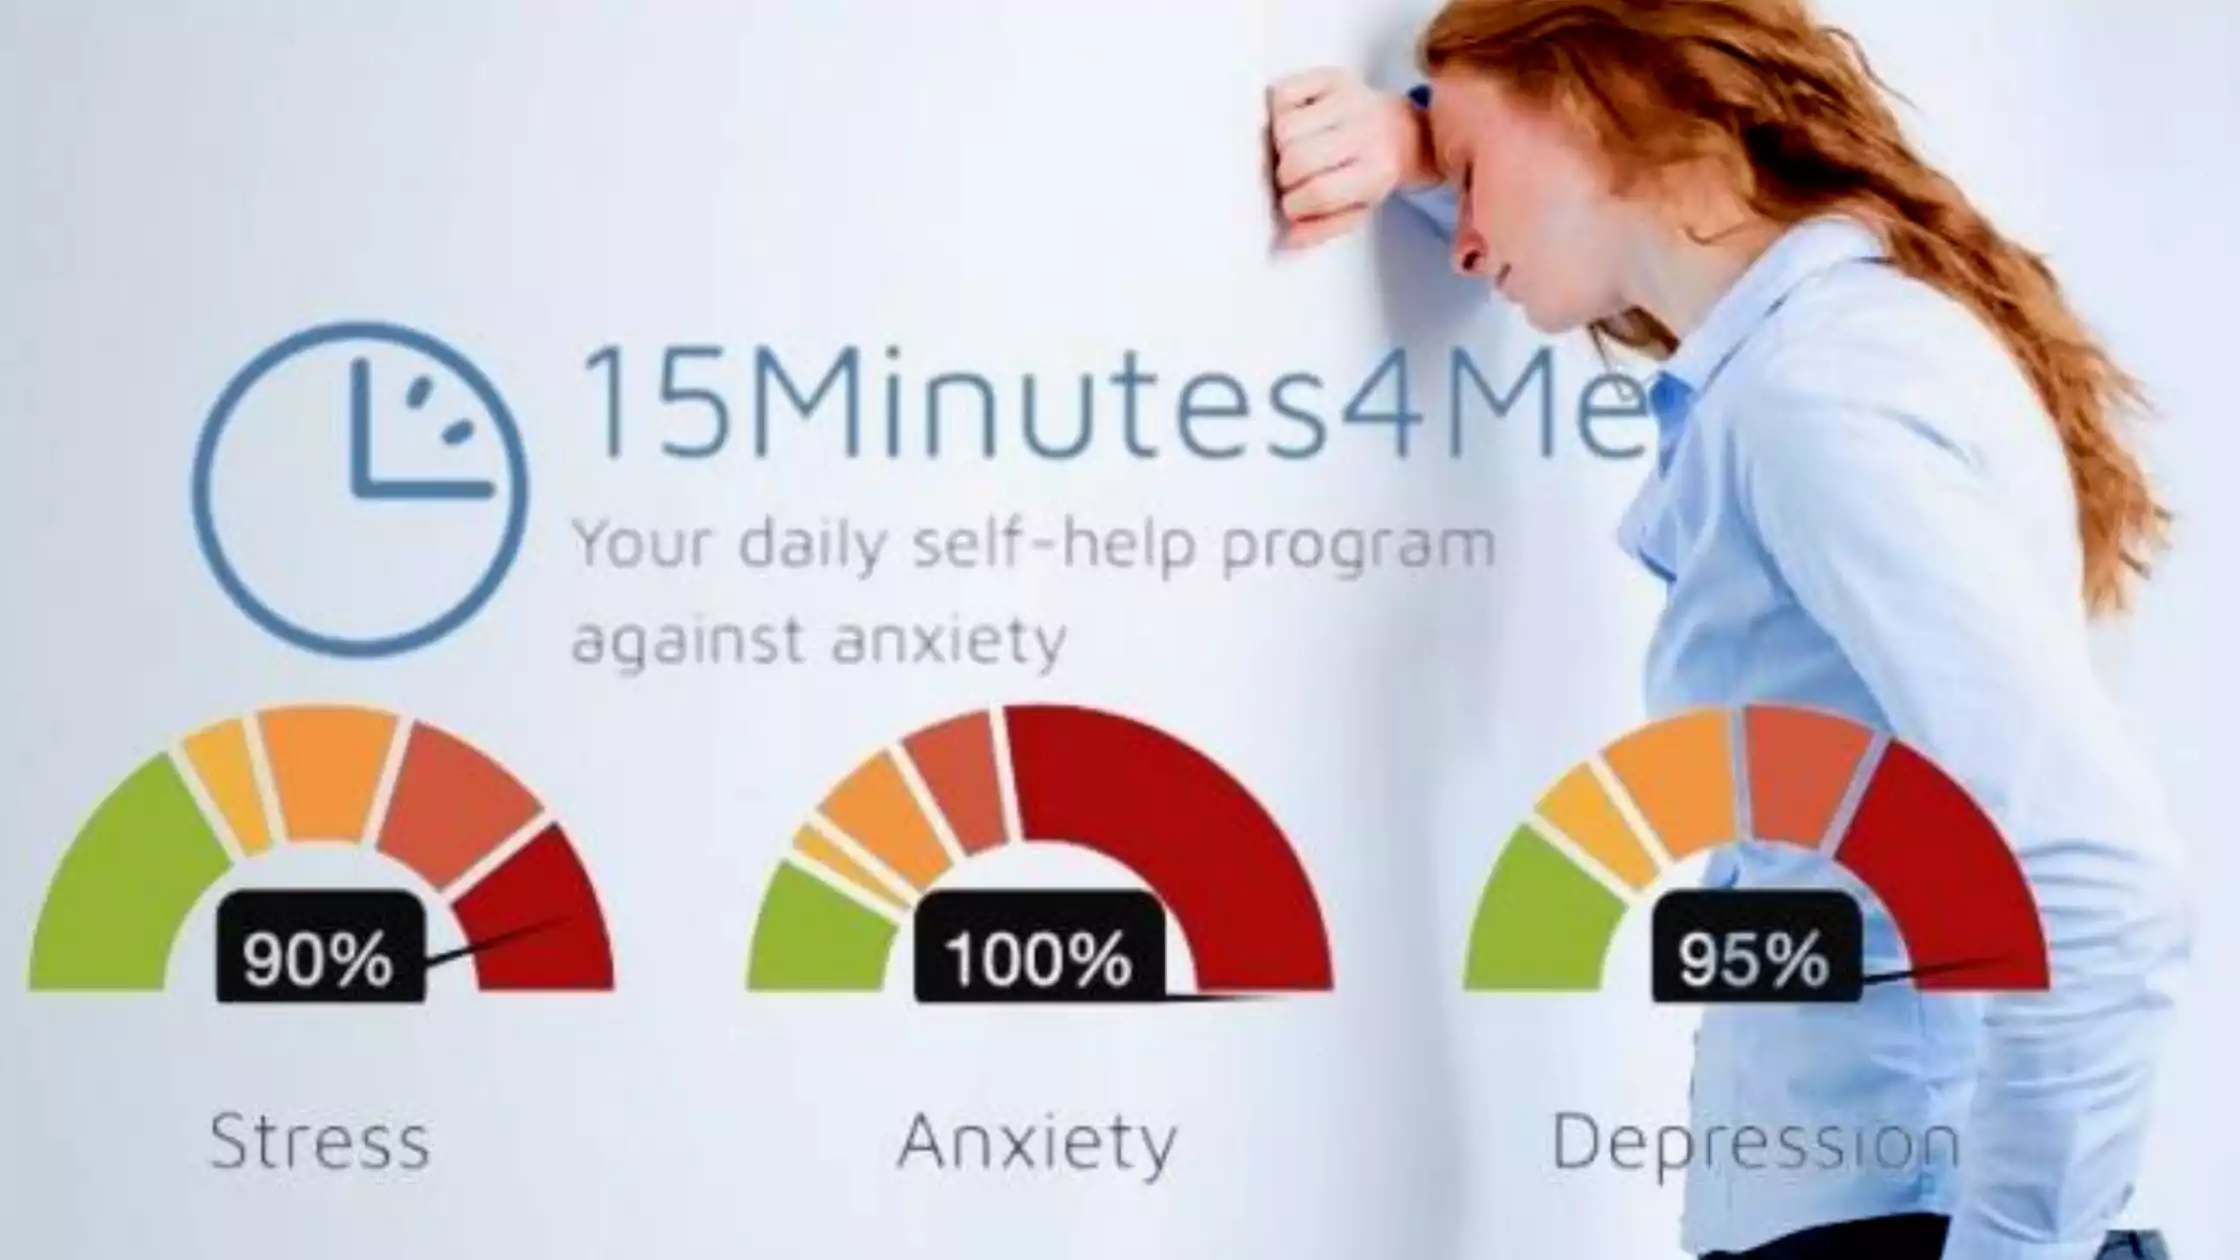 Get Stress, Anxiety & Depression Solution with 15minutes4me